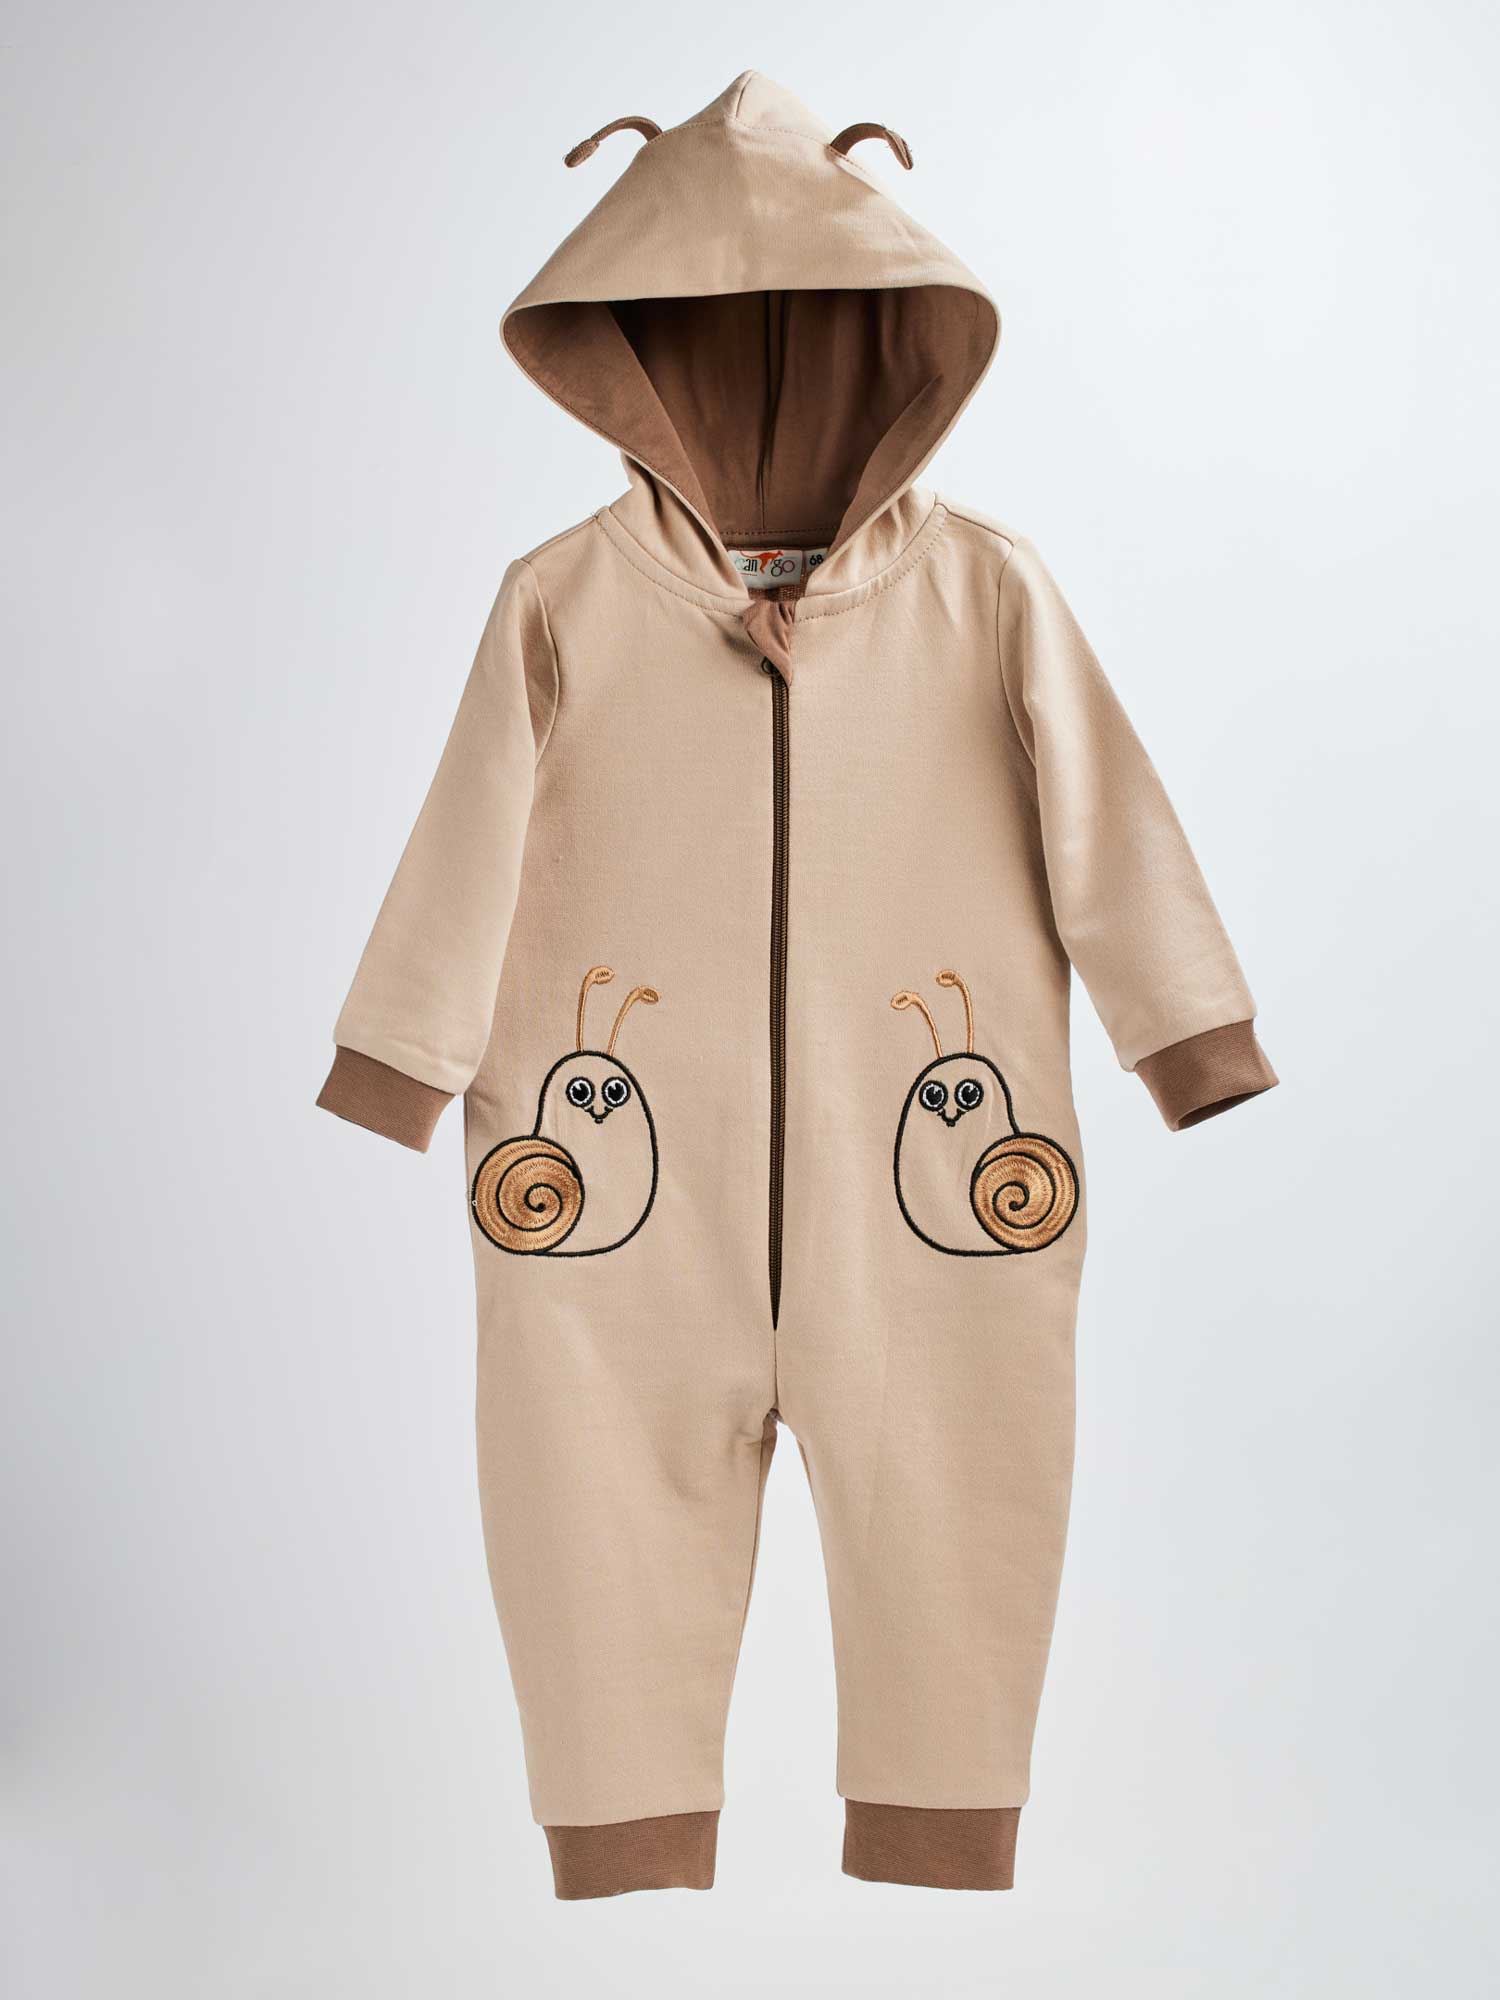 Infant overall snails 287 are one-piece hooded overalls made from high-quality soft cotton material and have embroidered sweet snails on them. In this image you can see how it looks without the hood